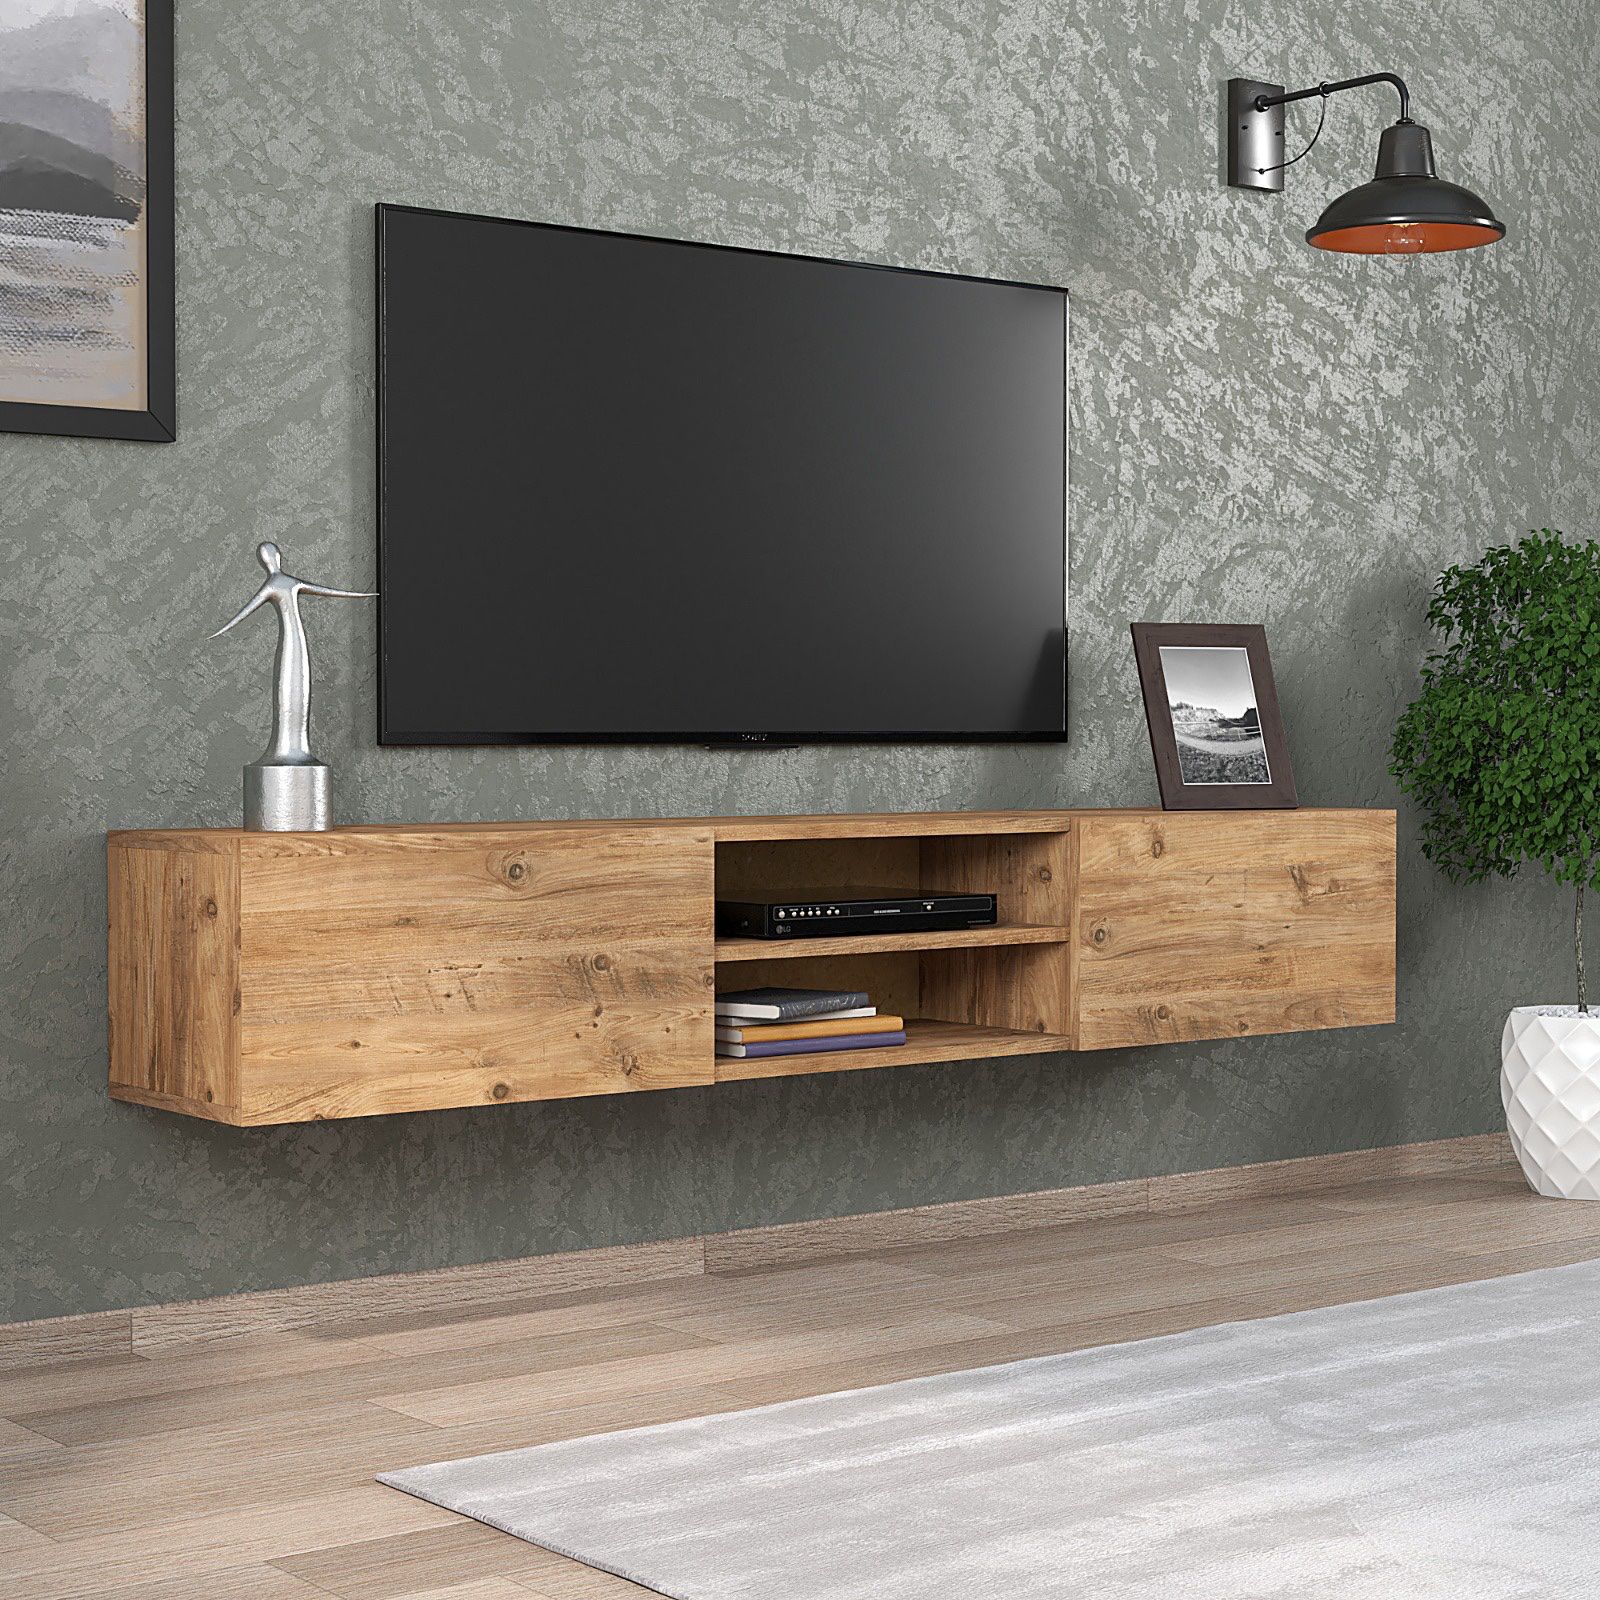 Stock Clearance % 60 Off - (4 Color Options) Otranto Floating TV Stand & Media Console